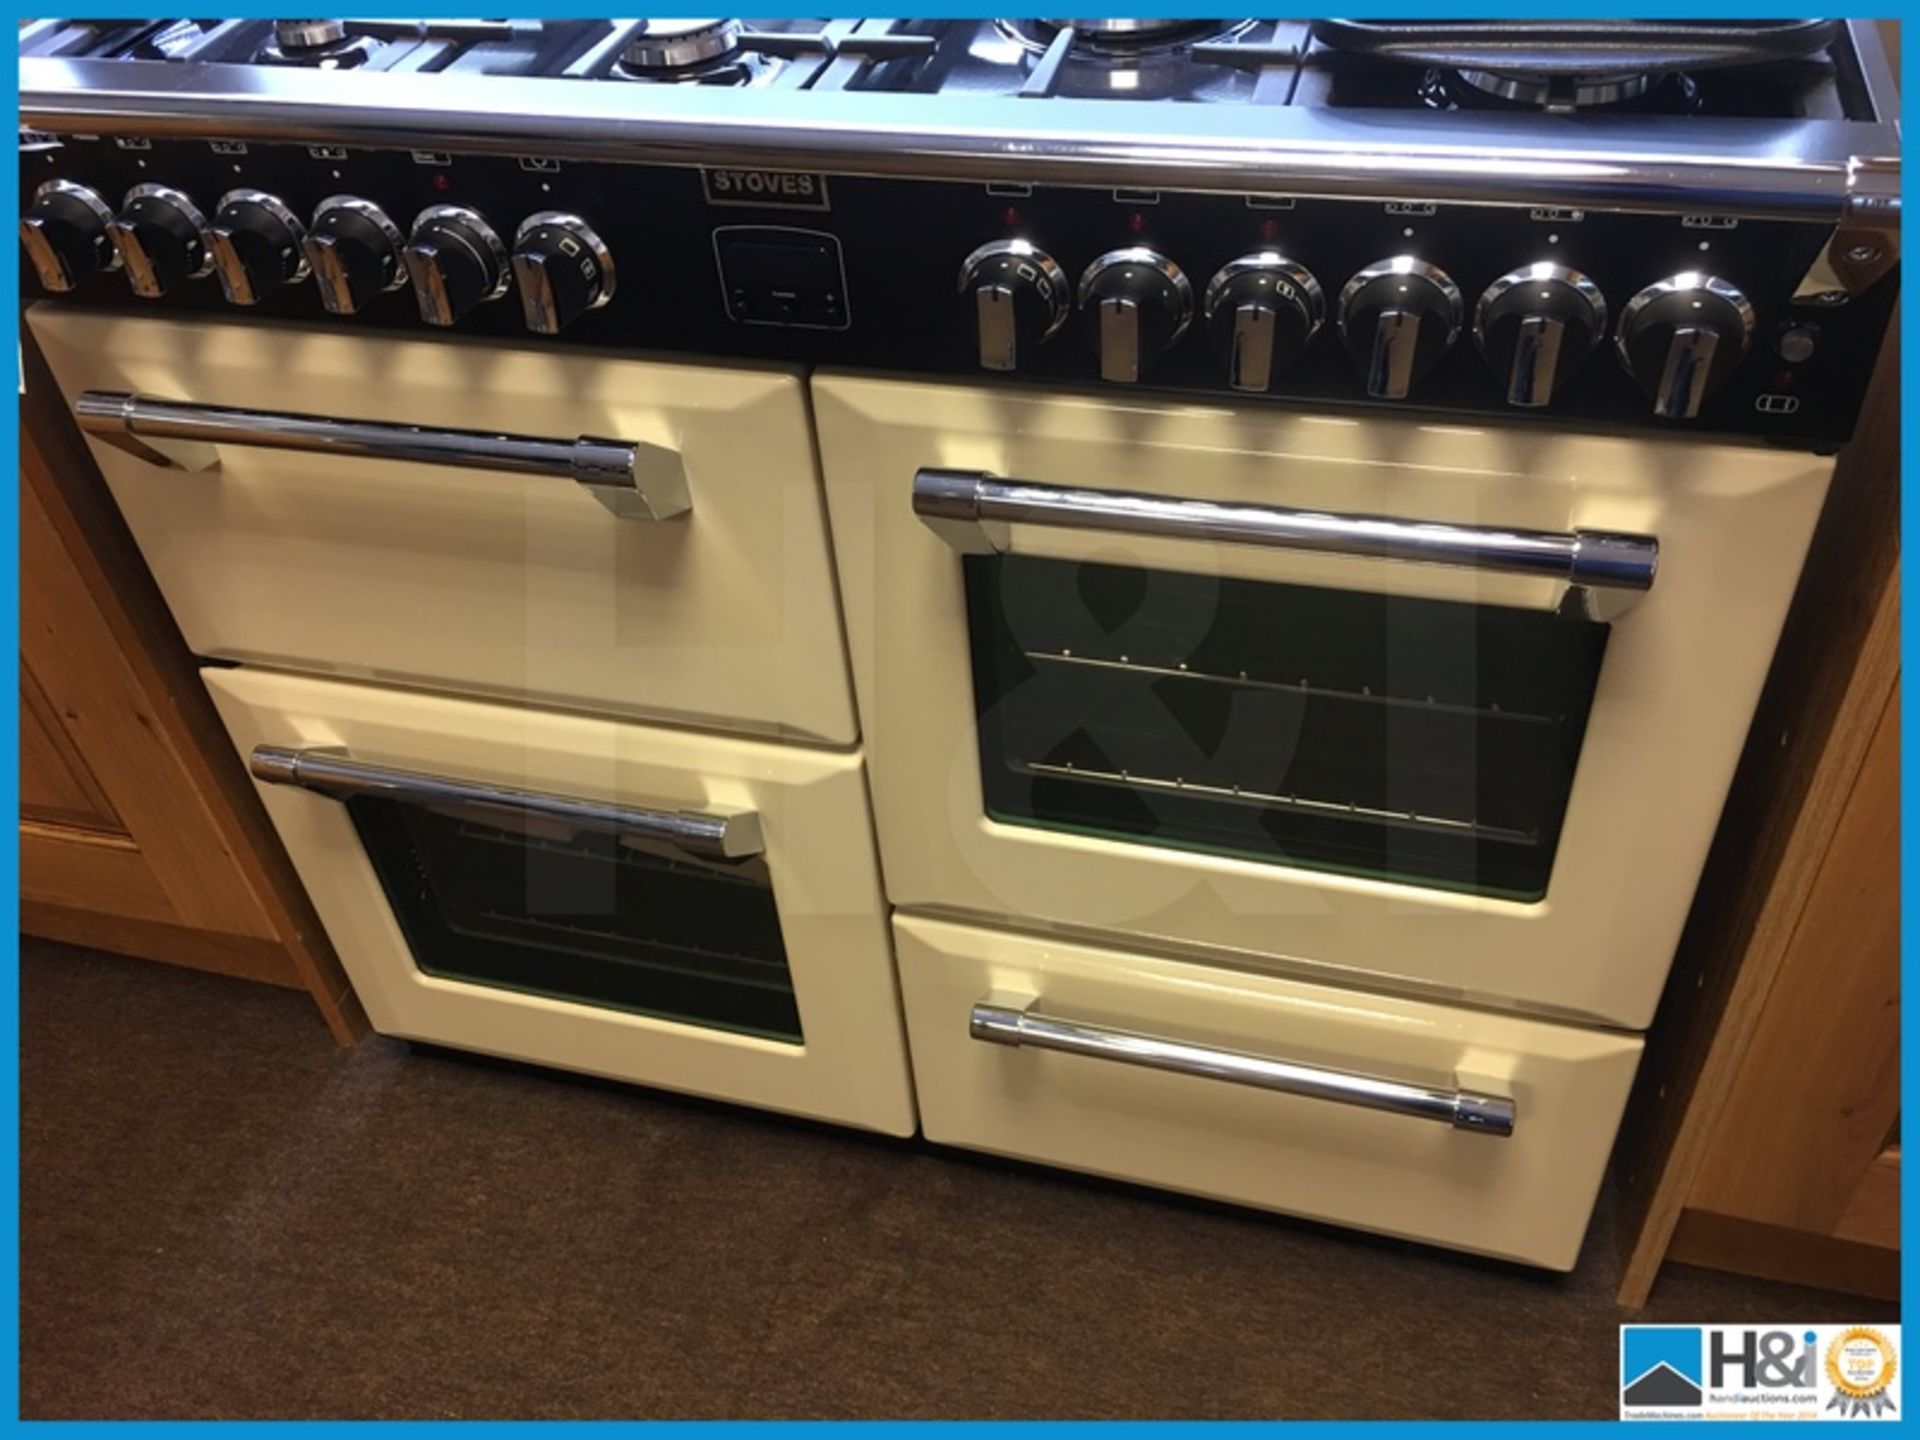 Stoves 1000mm wide double gas / electric oven with 7 gas rings and griddle. New and unused - Image 4 of 9